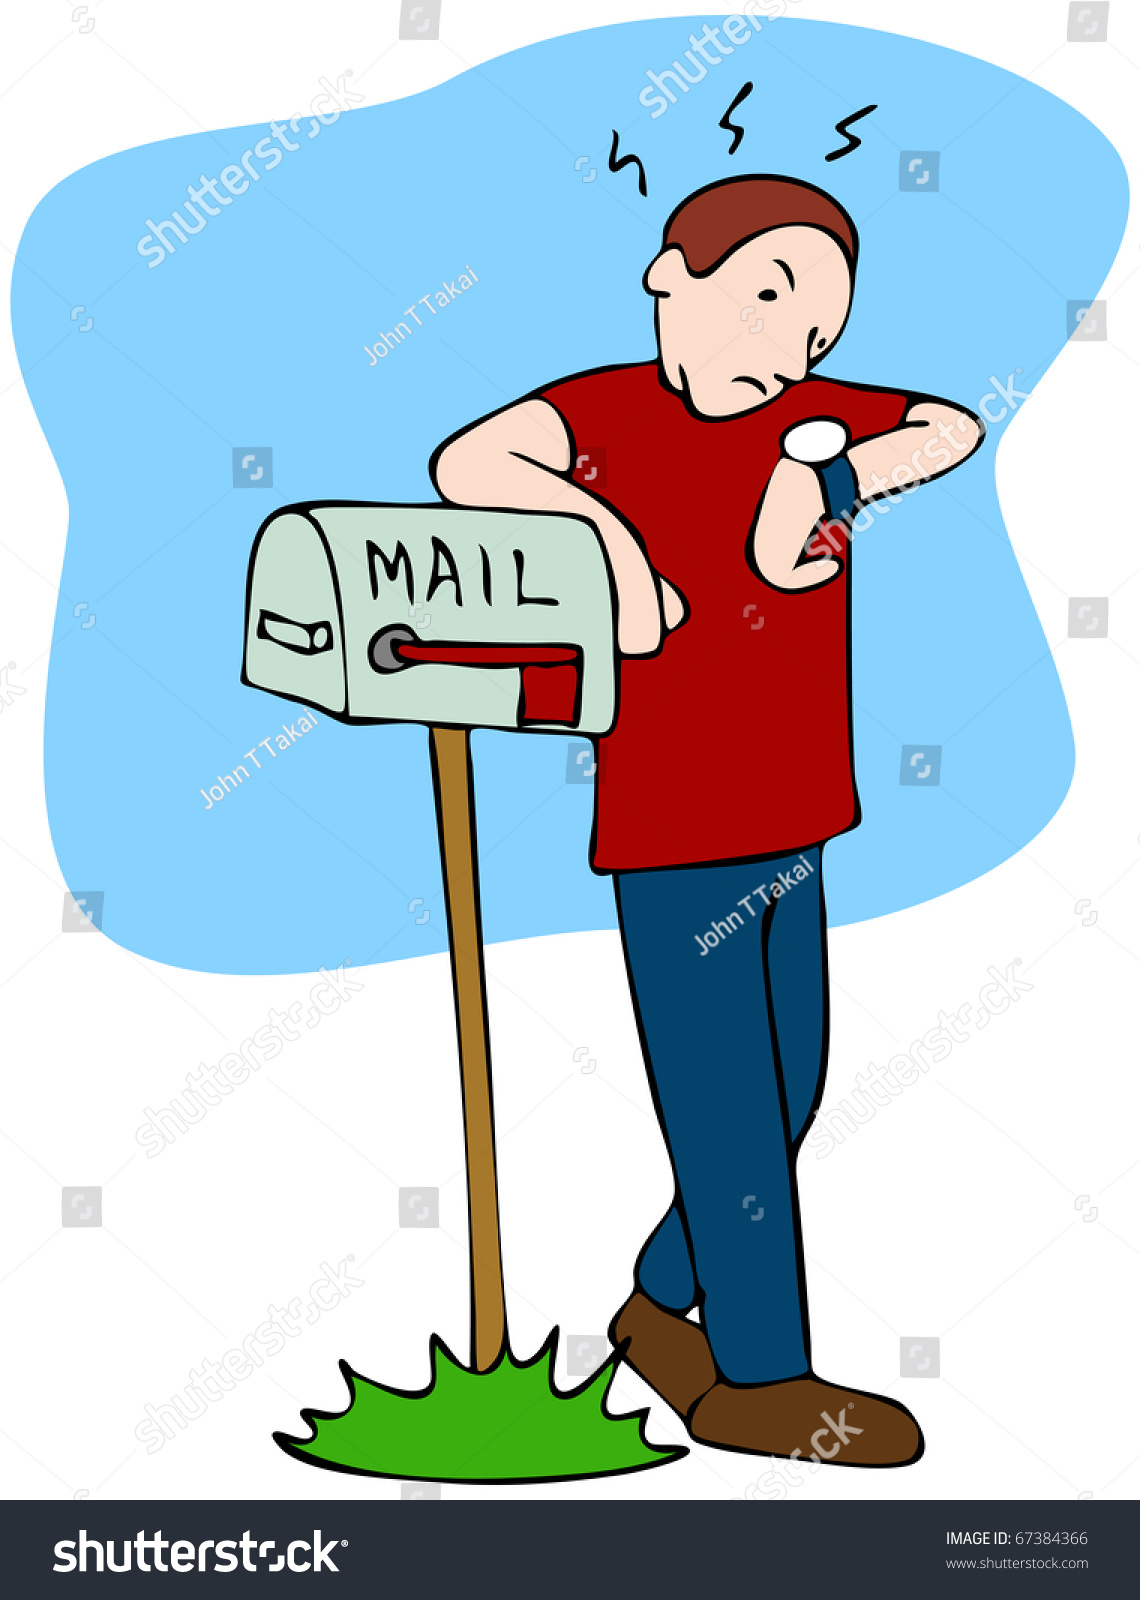 stock-photo-an-image-of-a-man-waiting-for-the-mailman-to-bring-the-mail-67384366.jpg